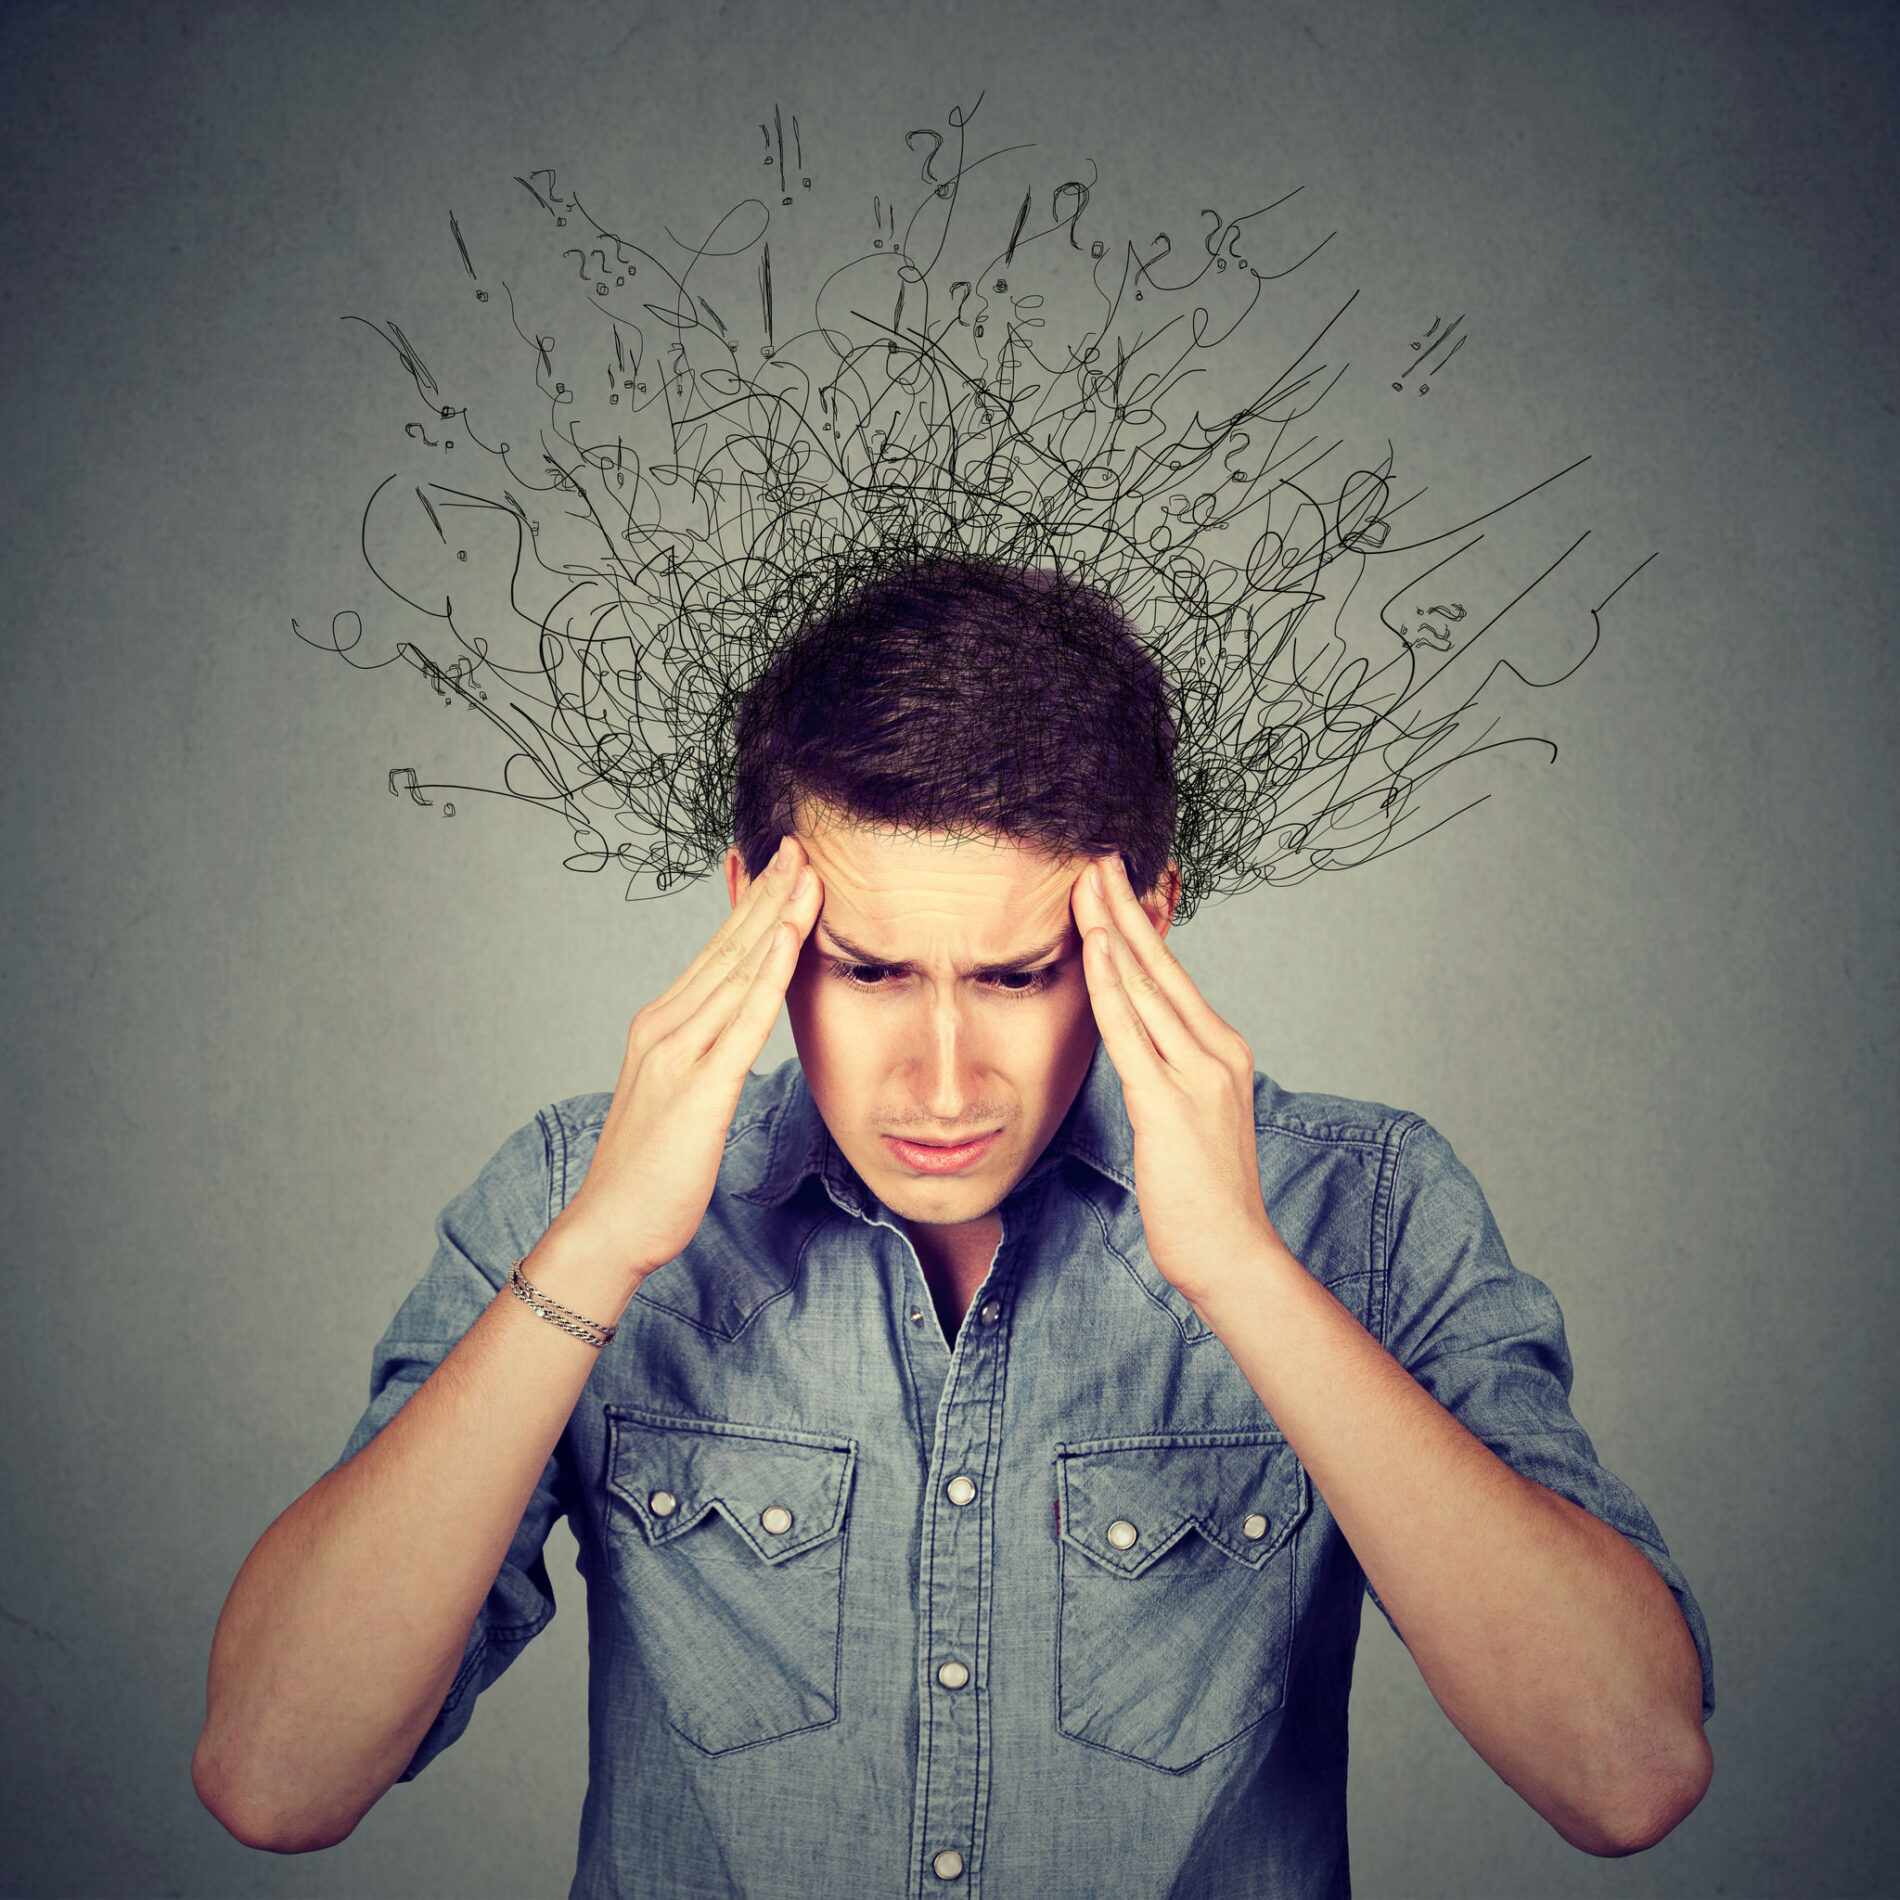 Negative Impacts of OCD Intrusive Thoughts